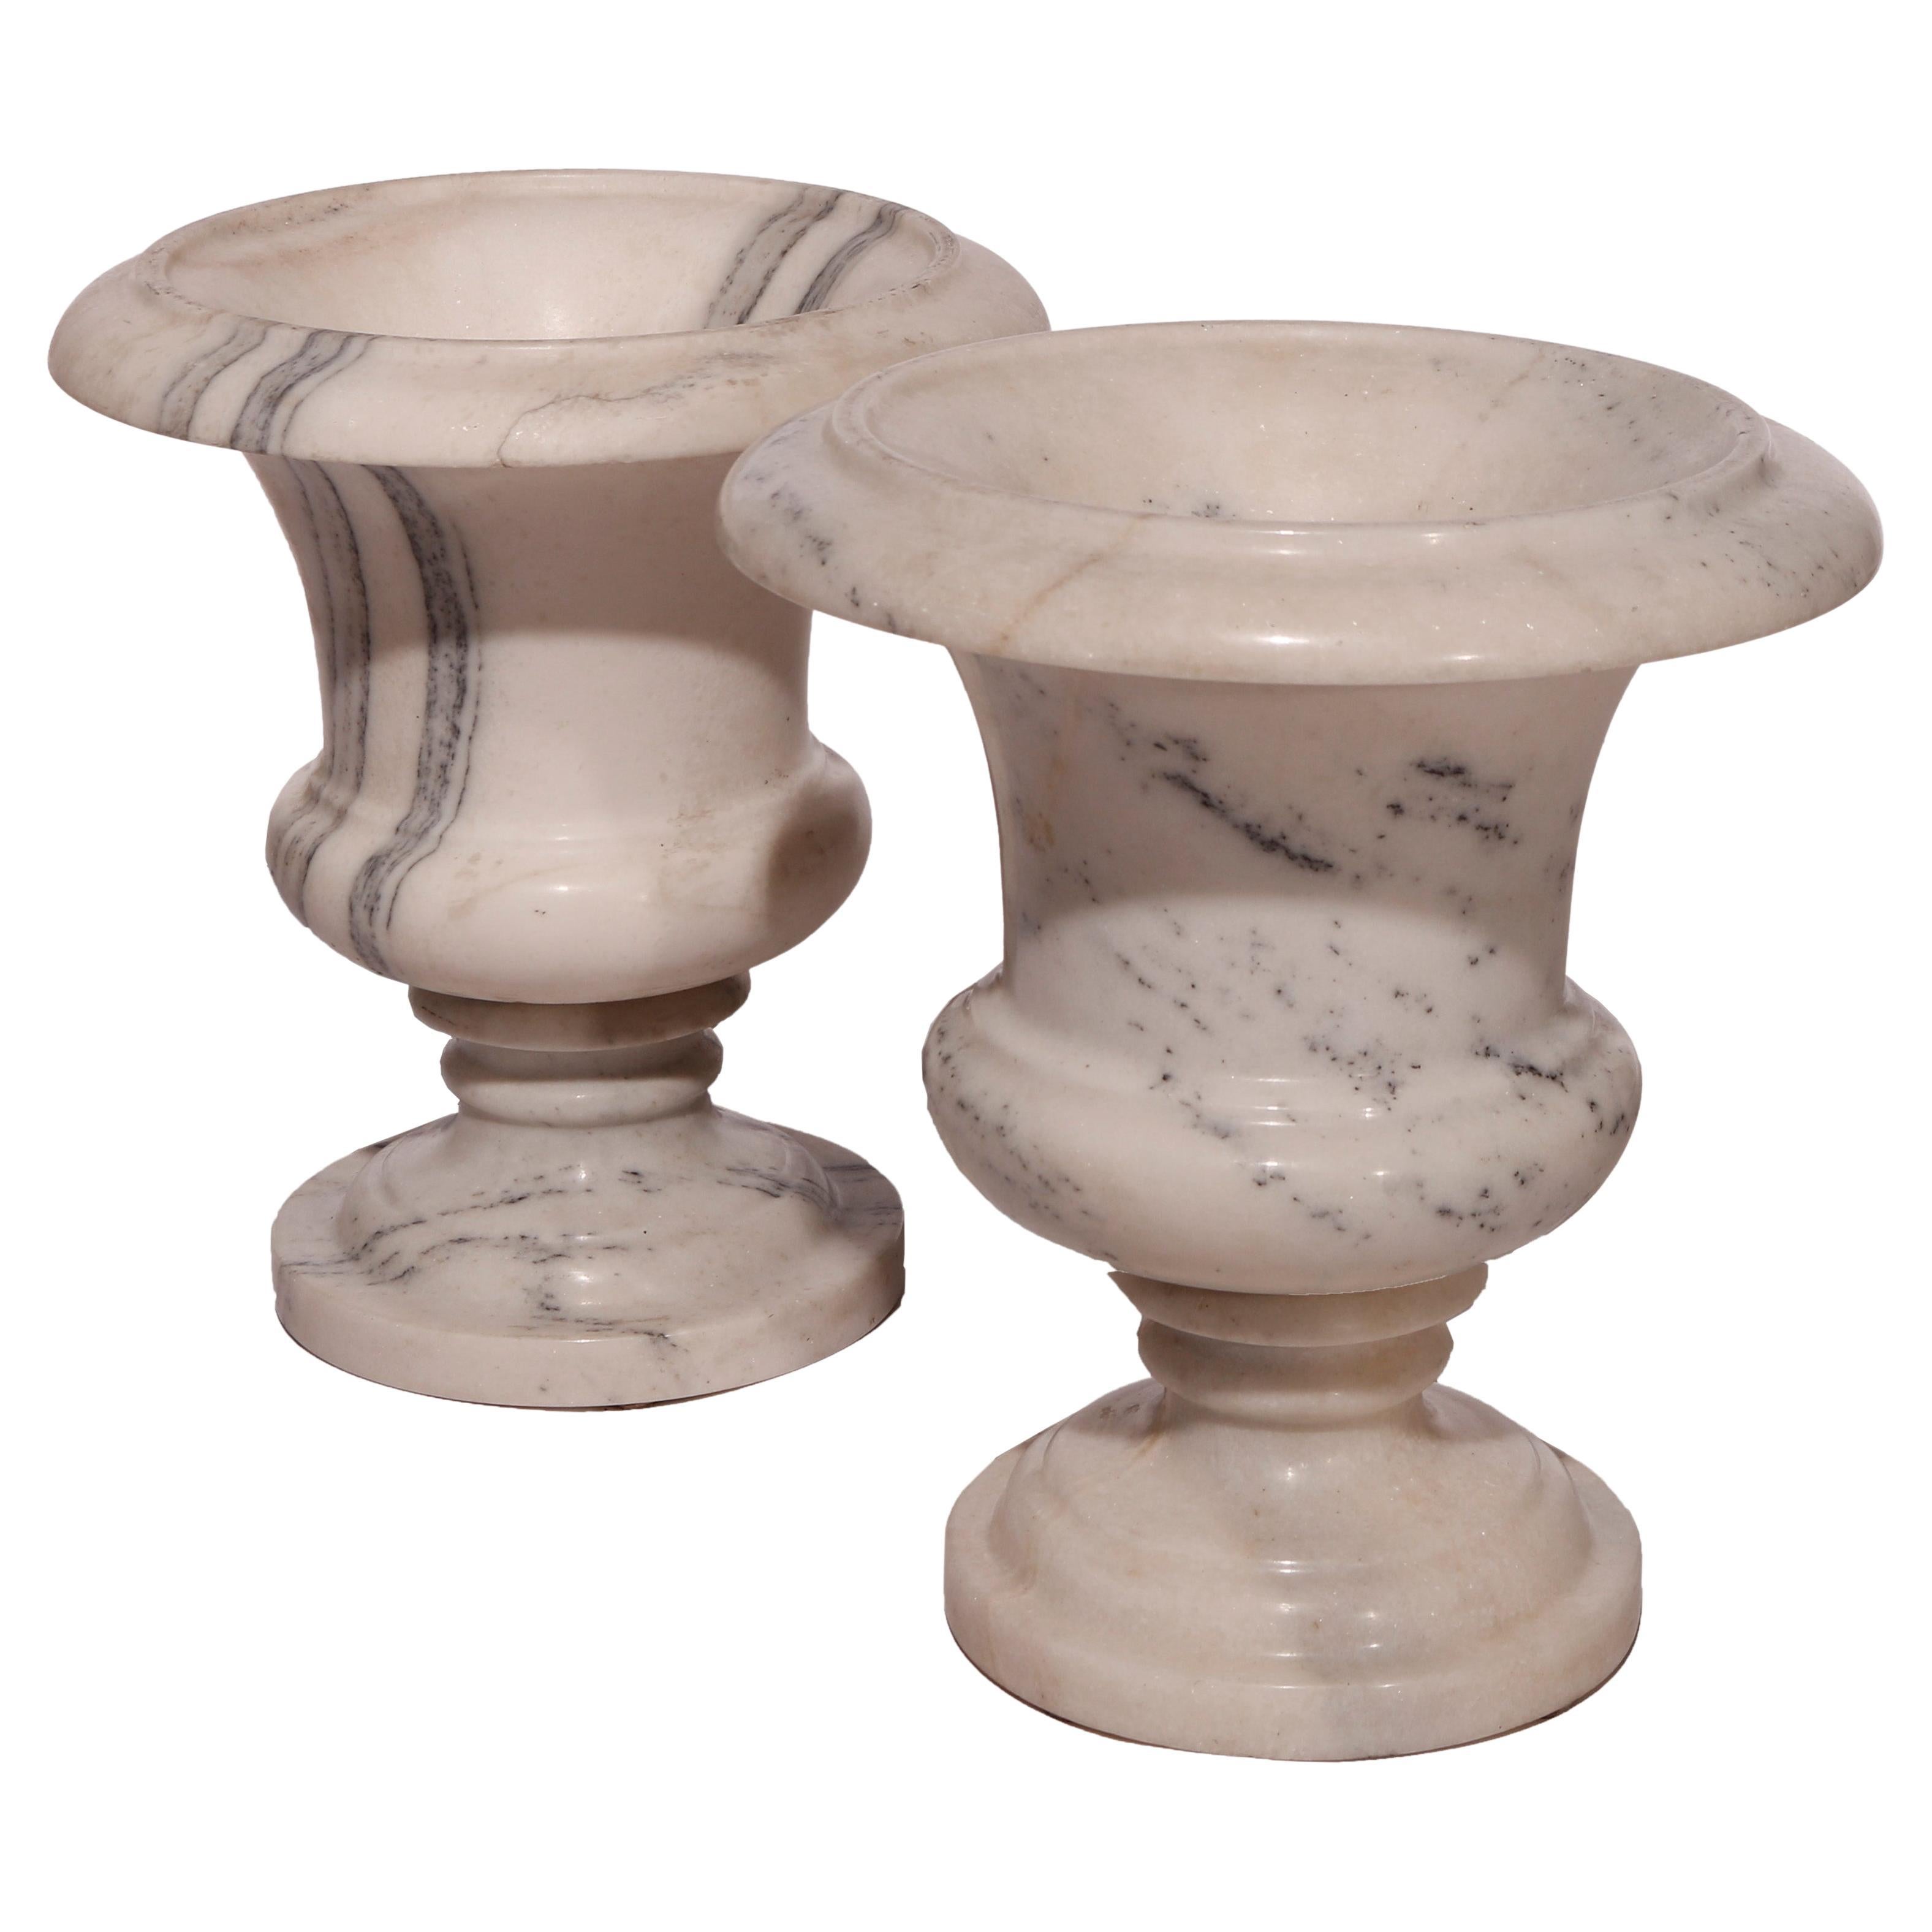 Antique Pair of Neoclassical Marble Garden Urns, 19th Century